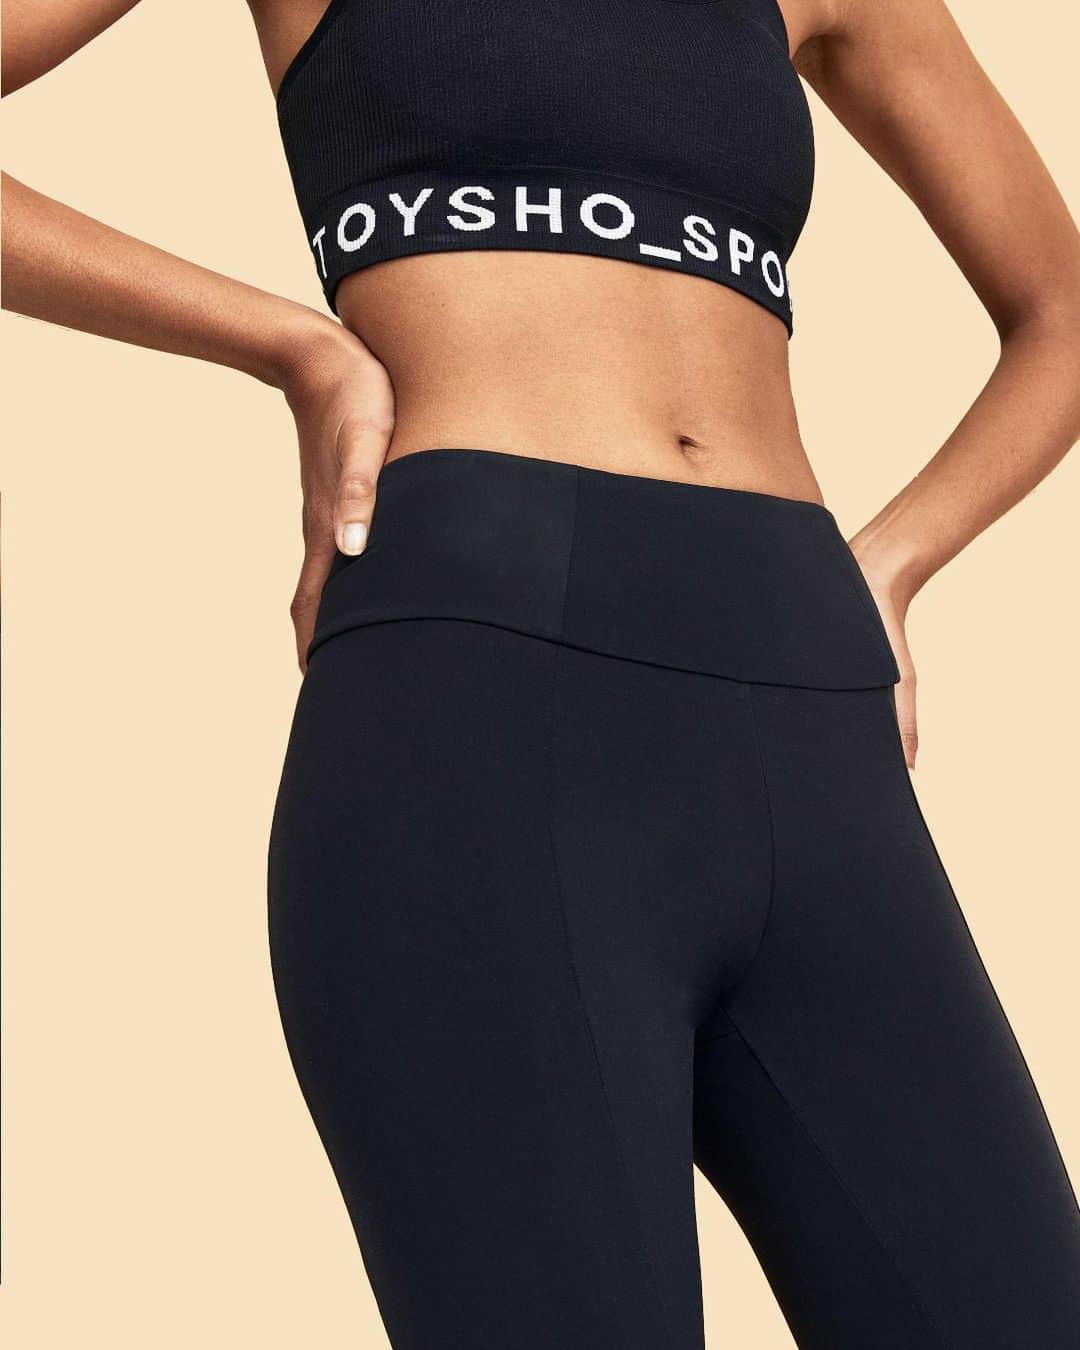 OYSHO - WARM EVIDENCE ⚠️ THE NEW Oysho_Sport LEGGINGS. This winter  essential has been designed to keep you dry and comfortable (*a secret  thing: they have a special warm touch interior). Shop